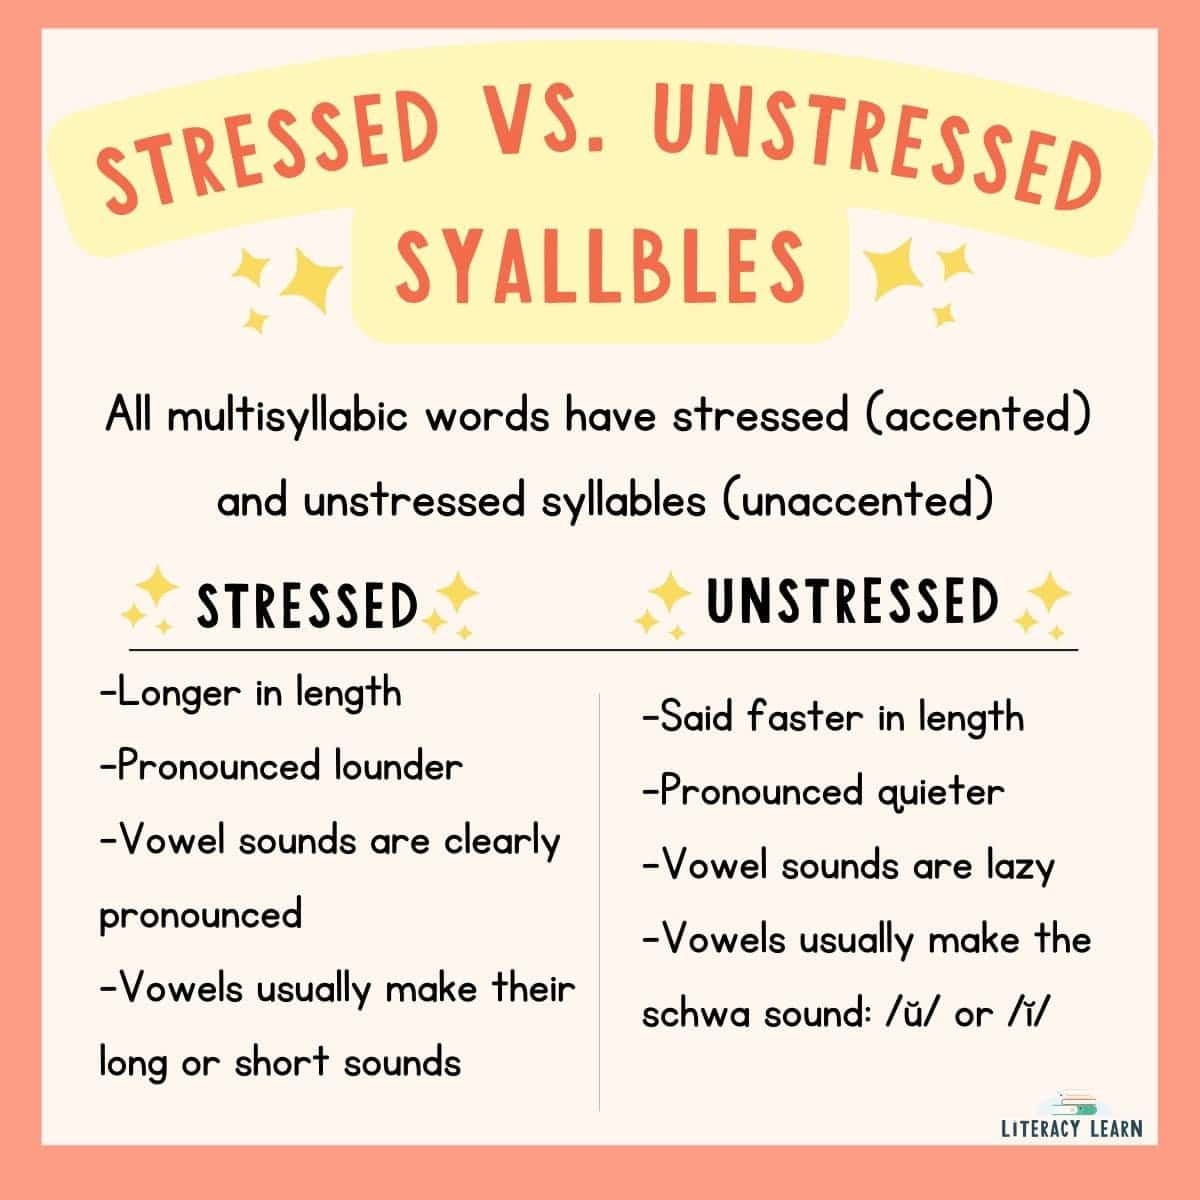 Graphic titled "Stressed Vs. Unstressed Syllables" with characteristics of each.